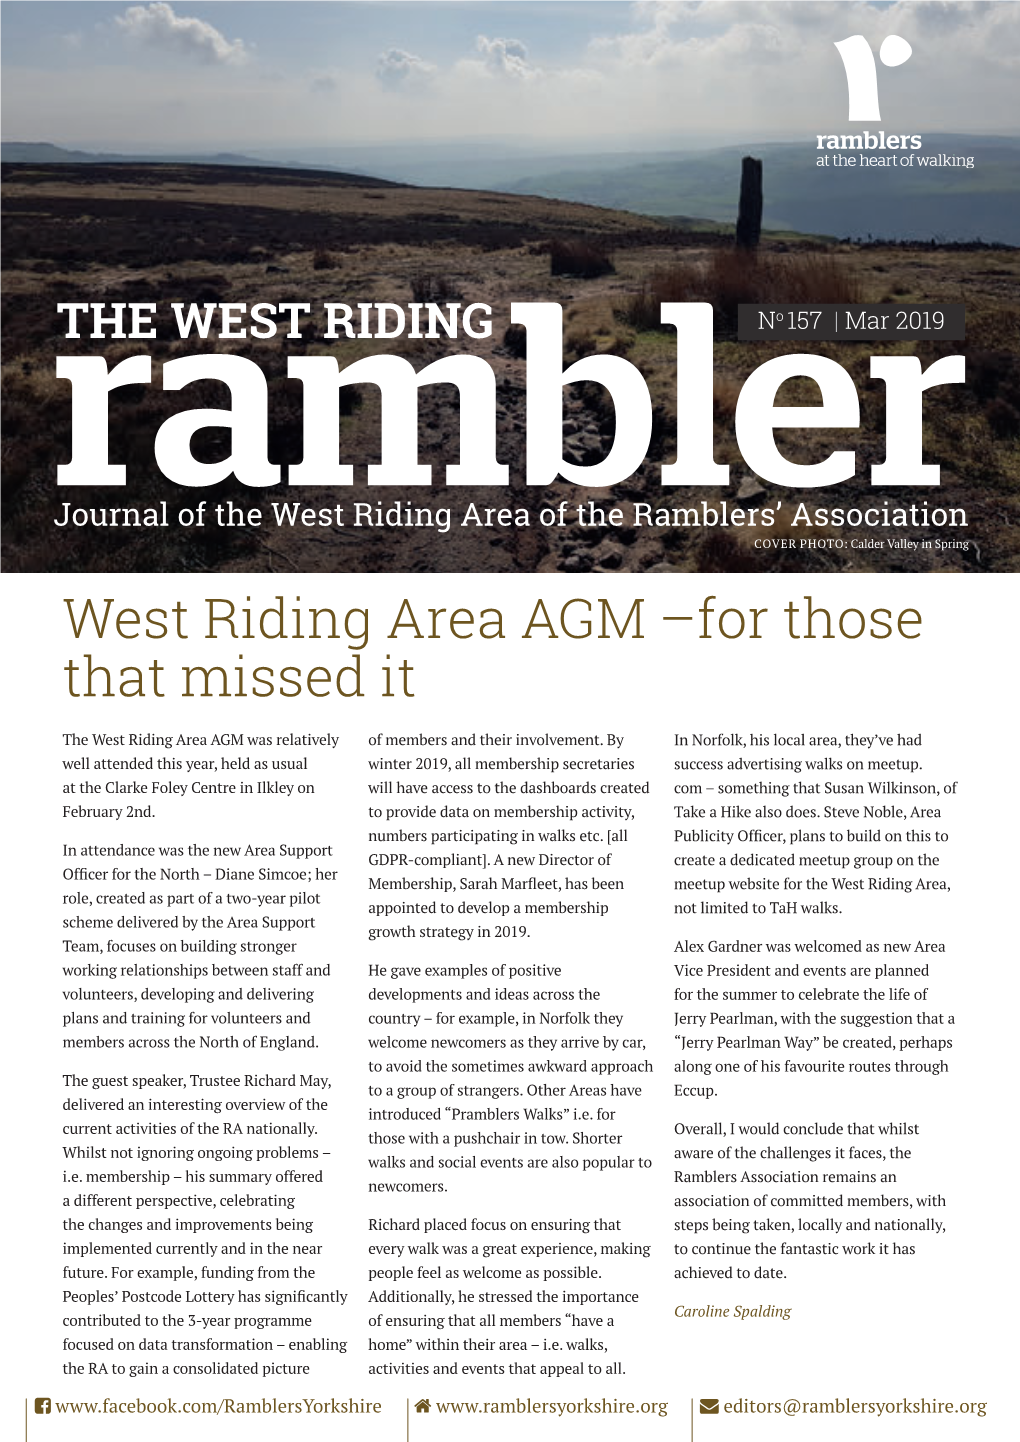 West Riding Area AGM –For Those That Missed It